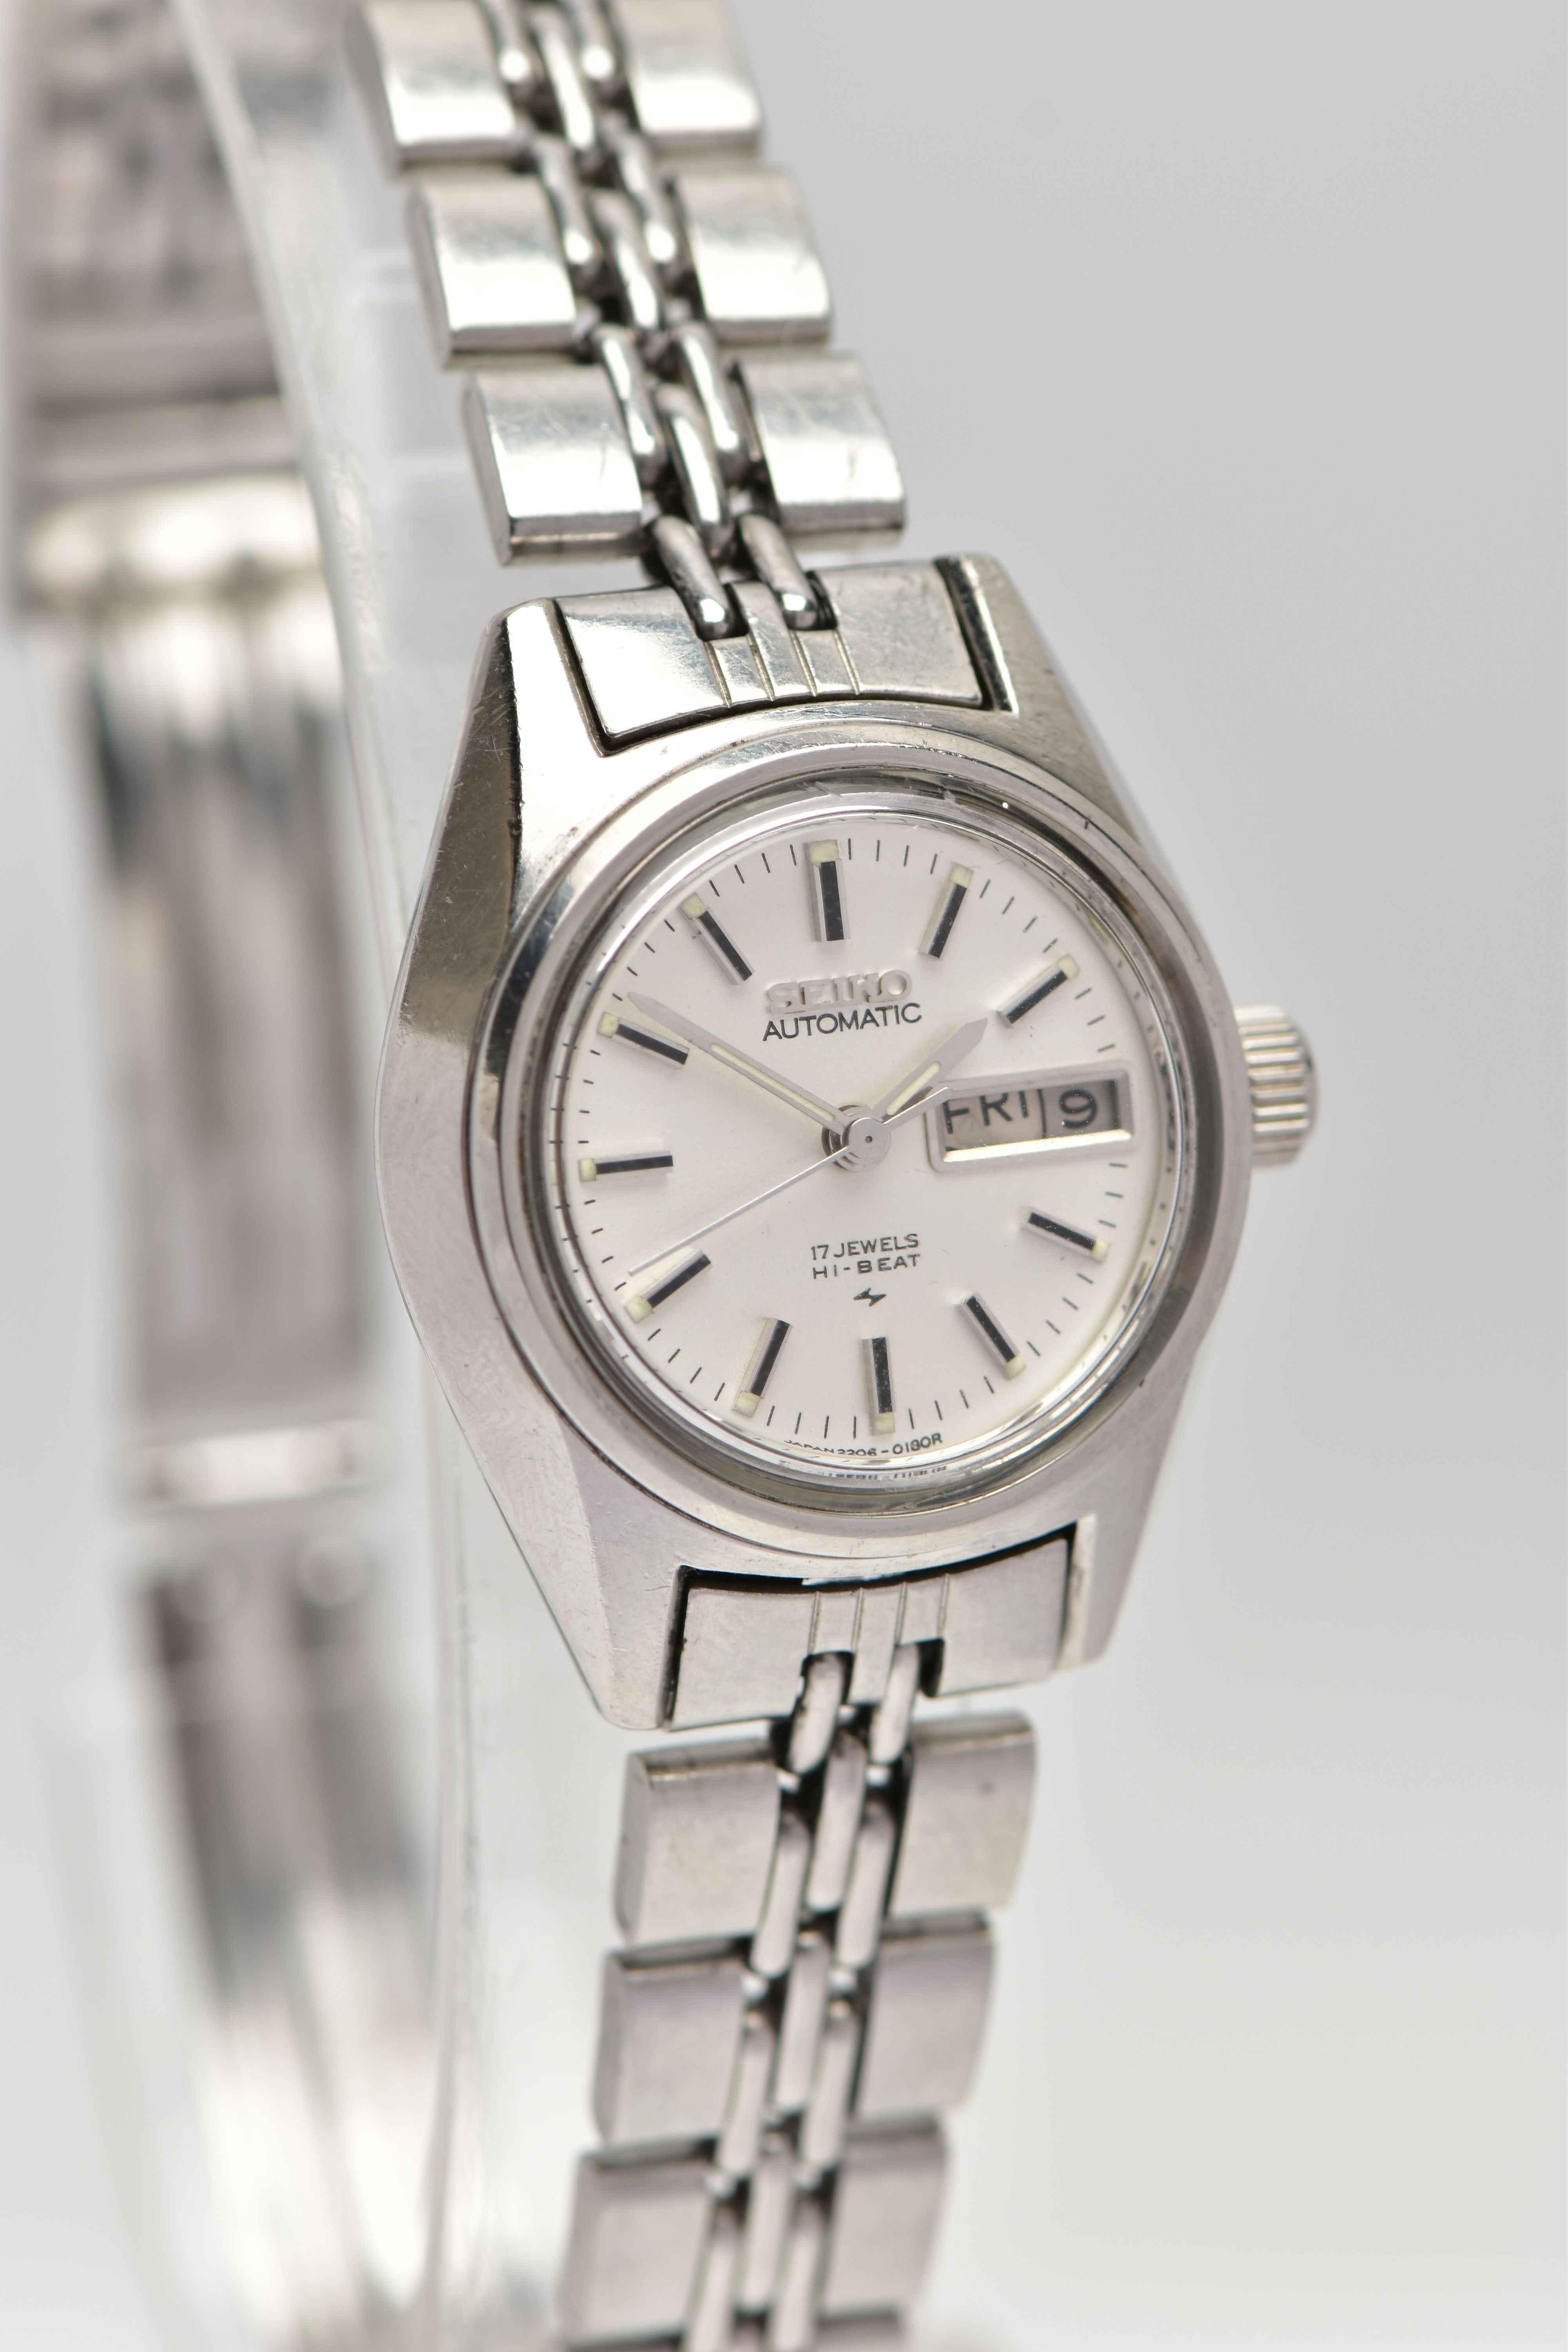 A LADIES 'SEIKO AUTOMATIC' WRISTWATCH, round silver dial signed 'Seiko automatic', day/date window - Image 2 of 6